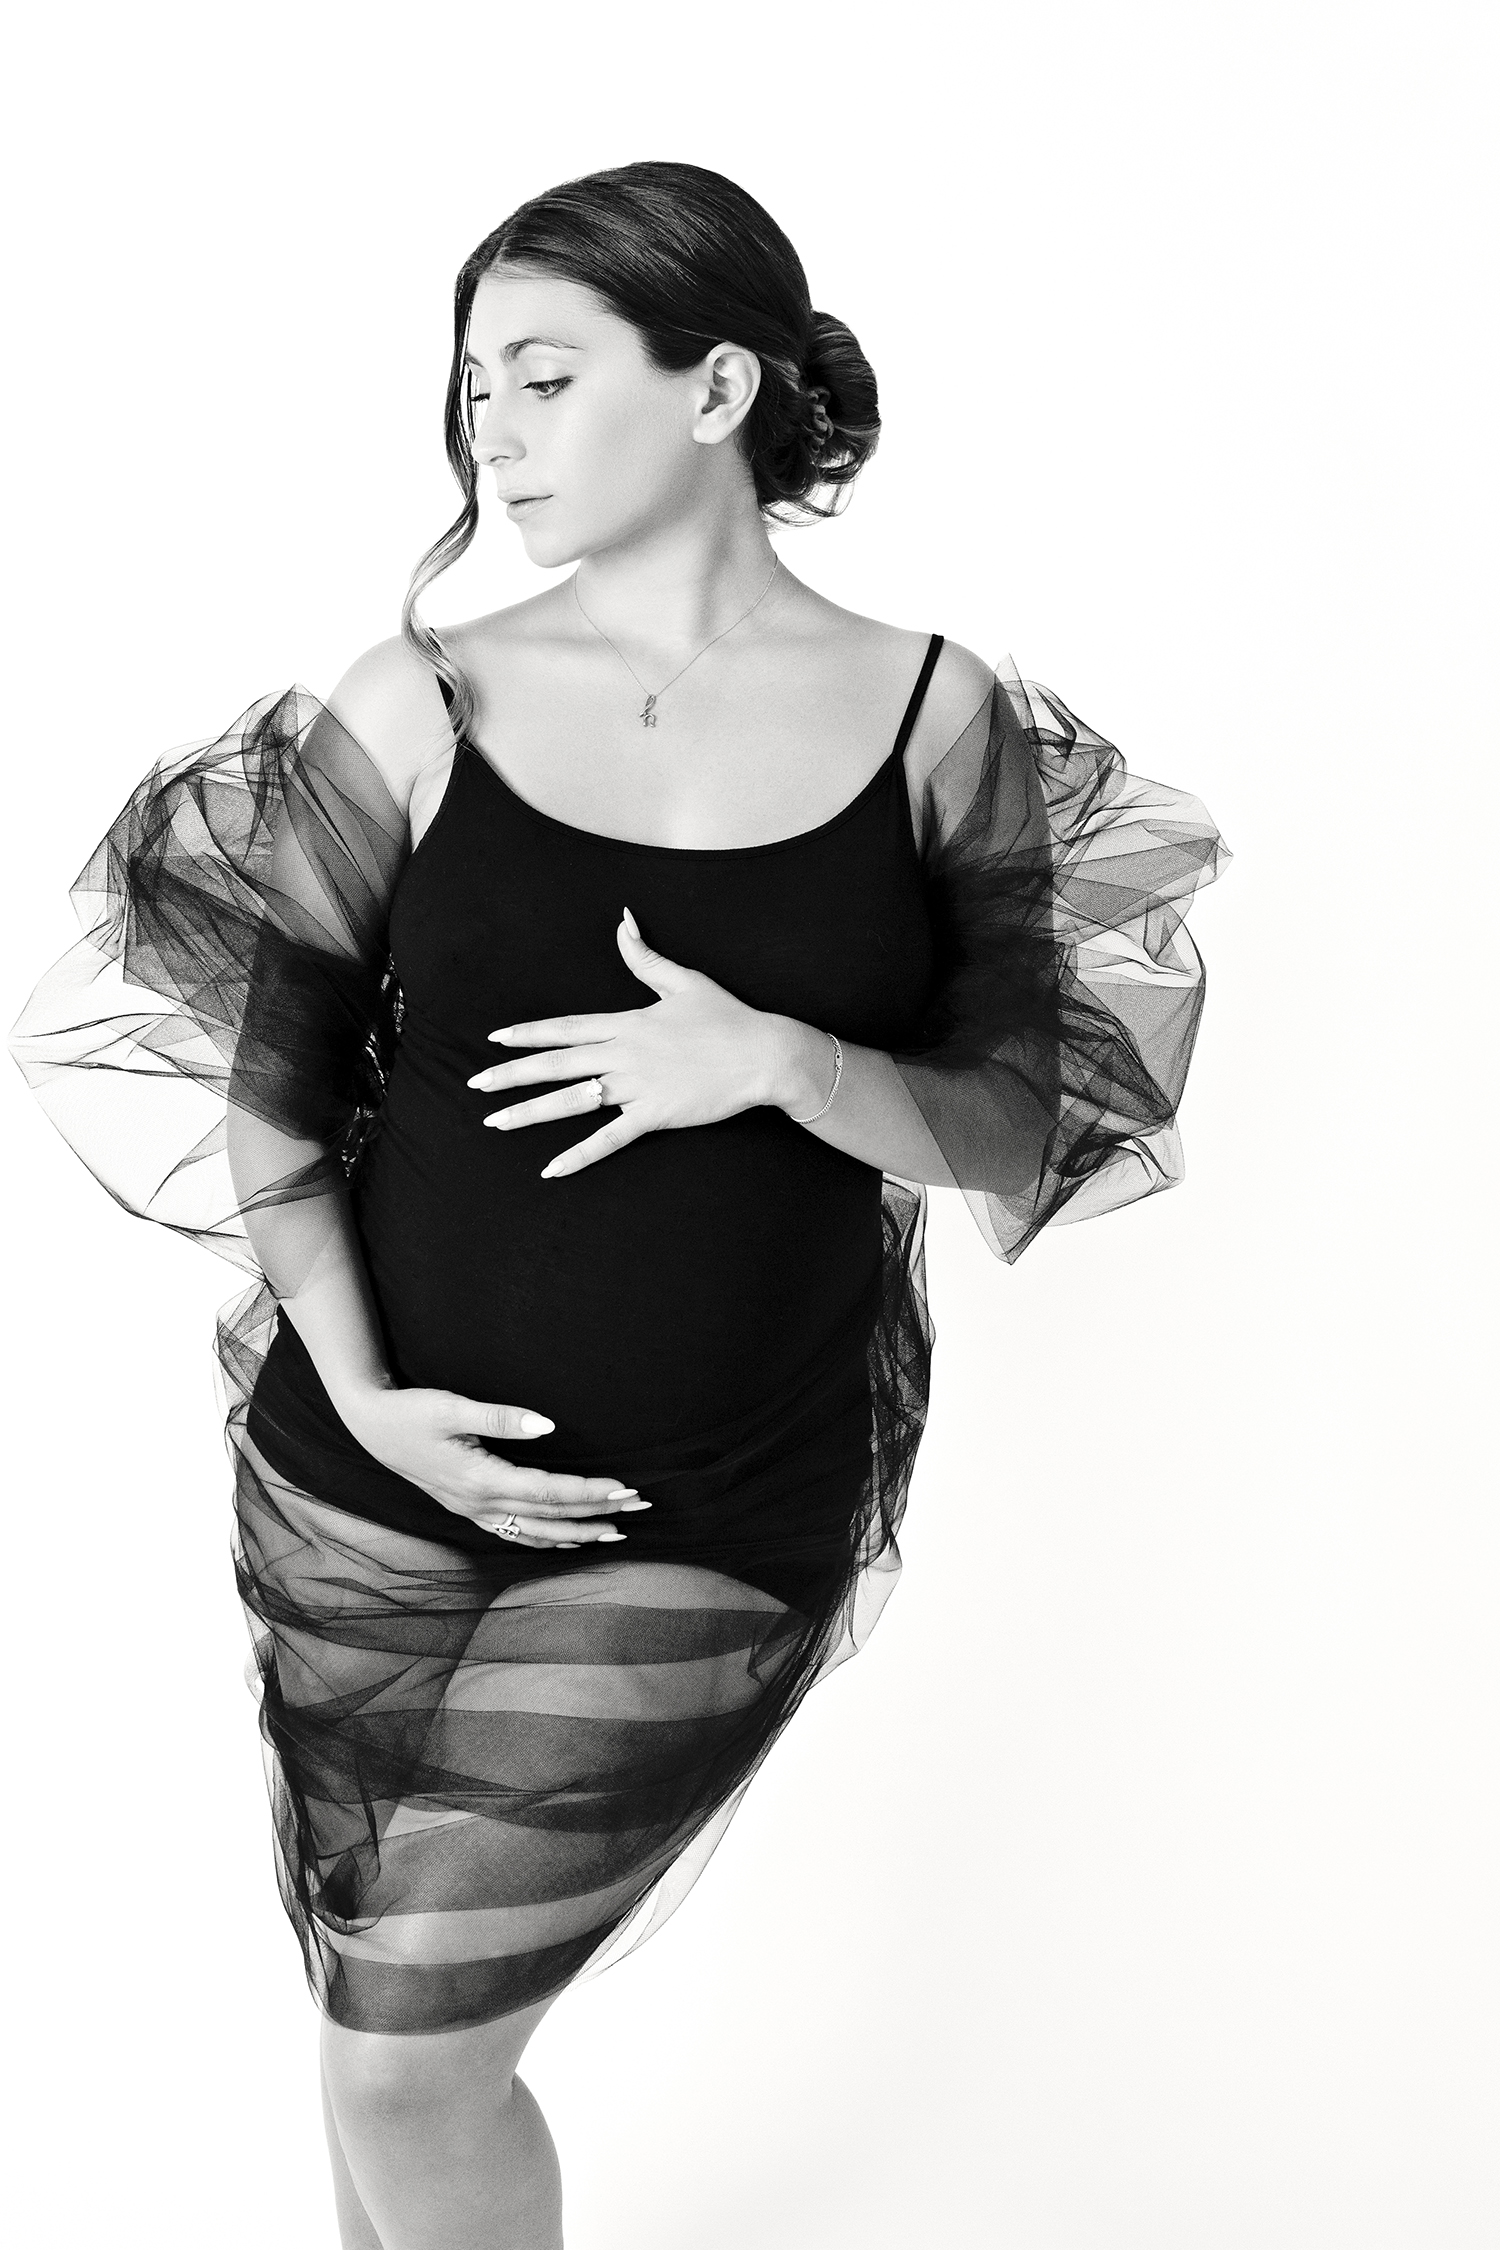 fashion image of pregnant woman in maternity pose